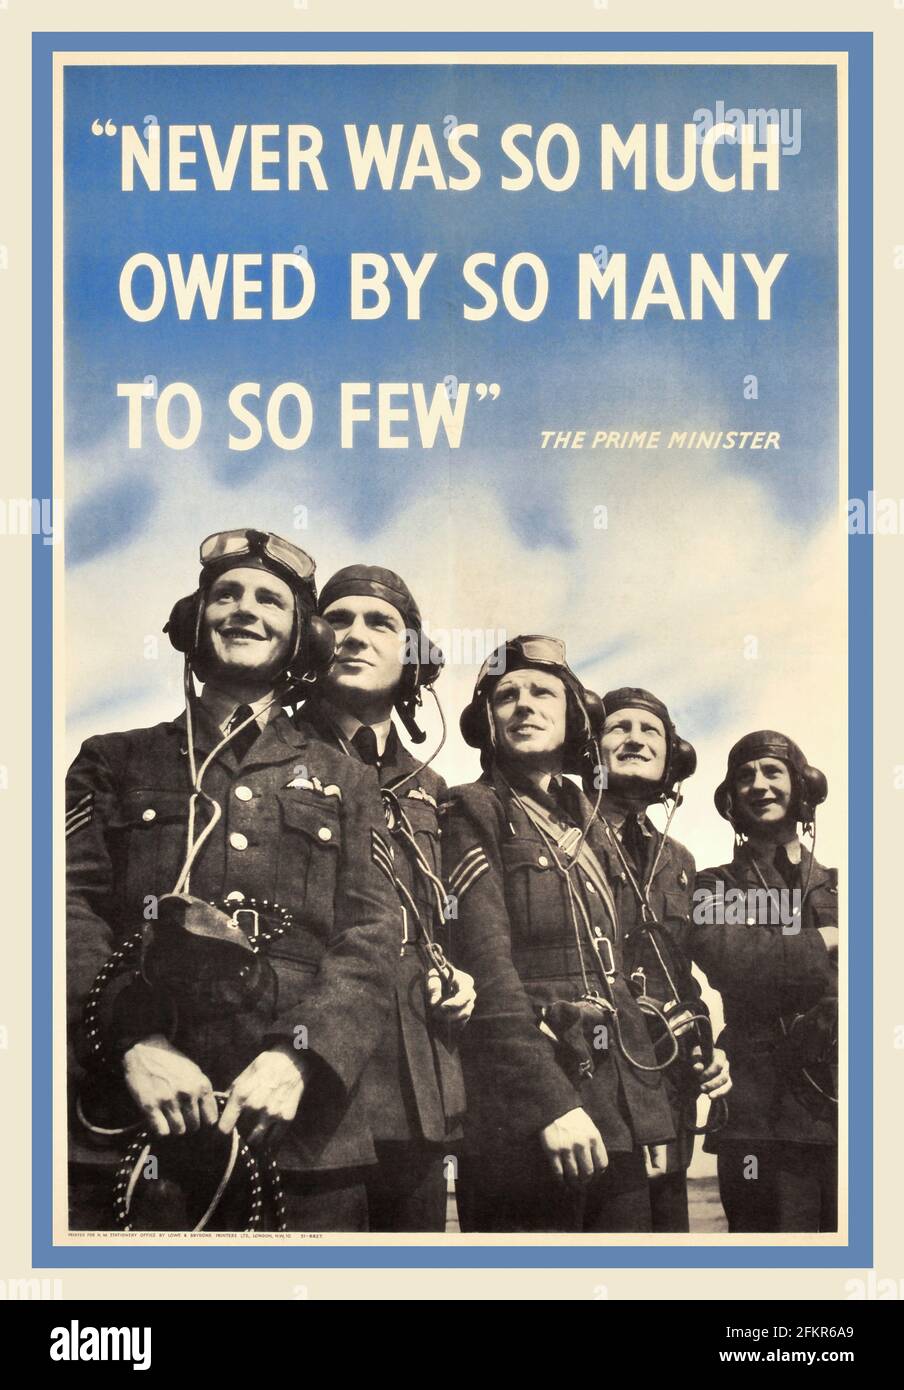 Battle of Britain vintage poster RAF 1940's British Vintage WW2 RAF Royal Air Force propaganda poster  - with Prime Minister Winston Churchill famous quote.. 'NEVER WAS SO MUCH OWED BY SO MANY TO SO FEW' Stock Photo